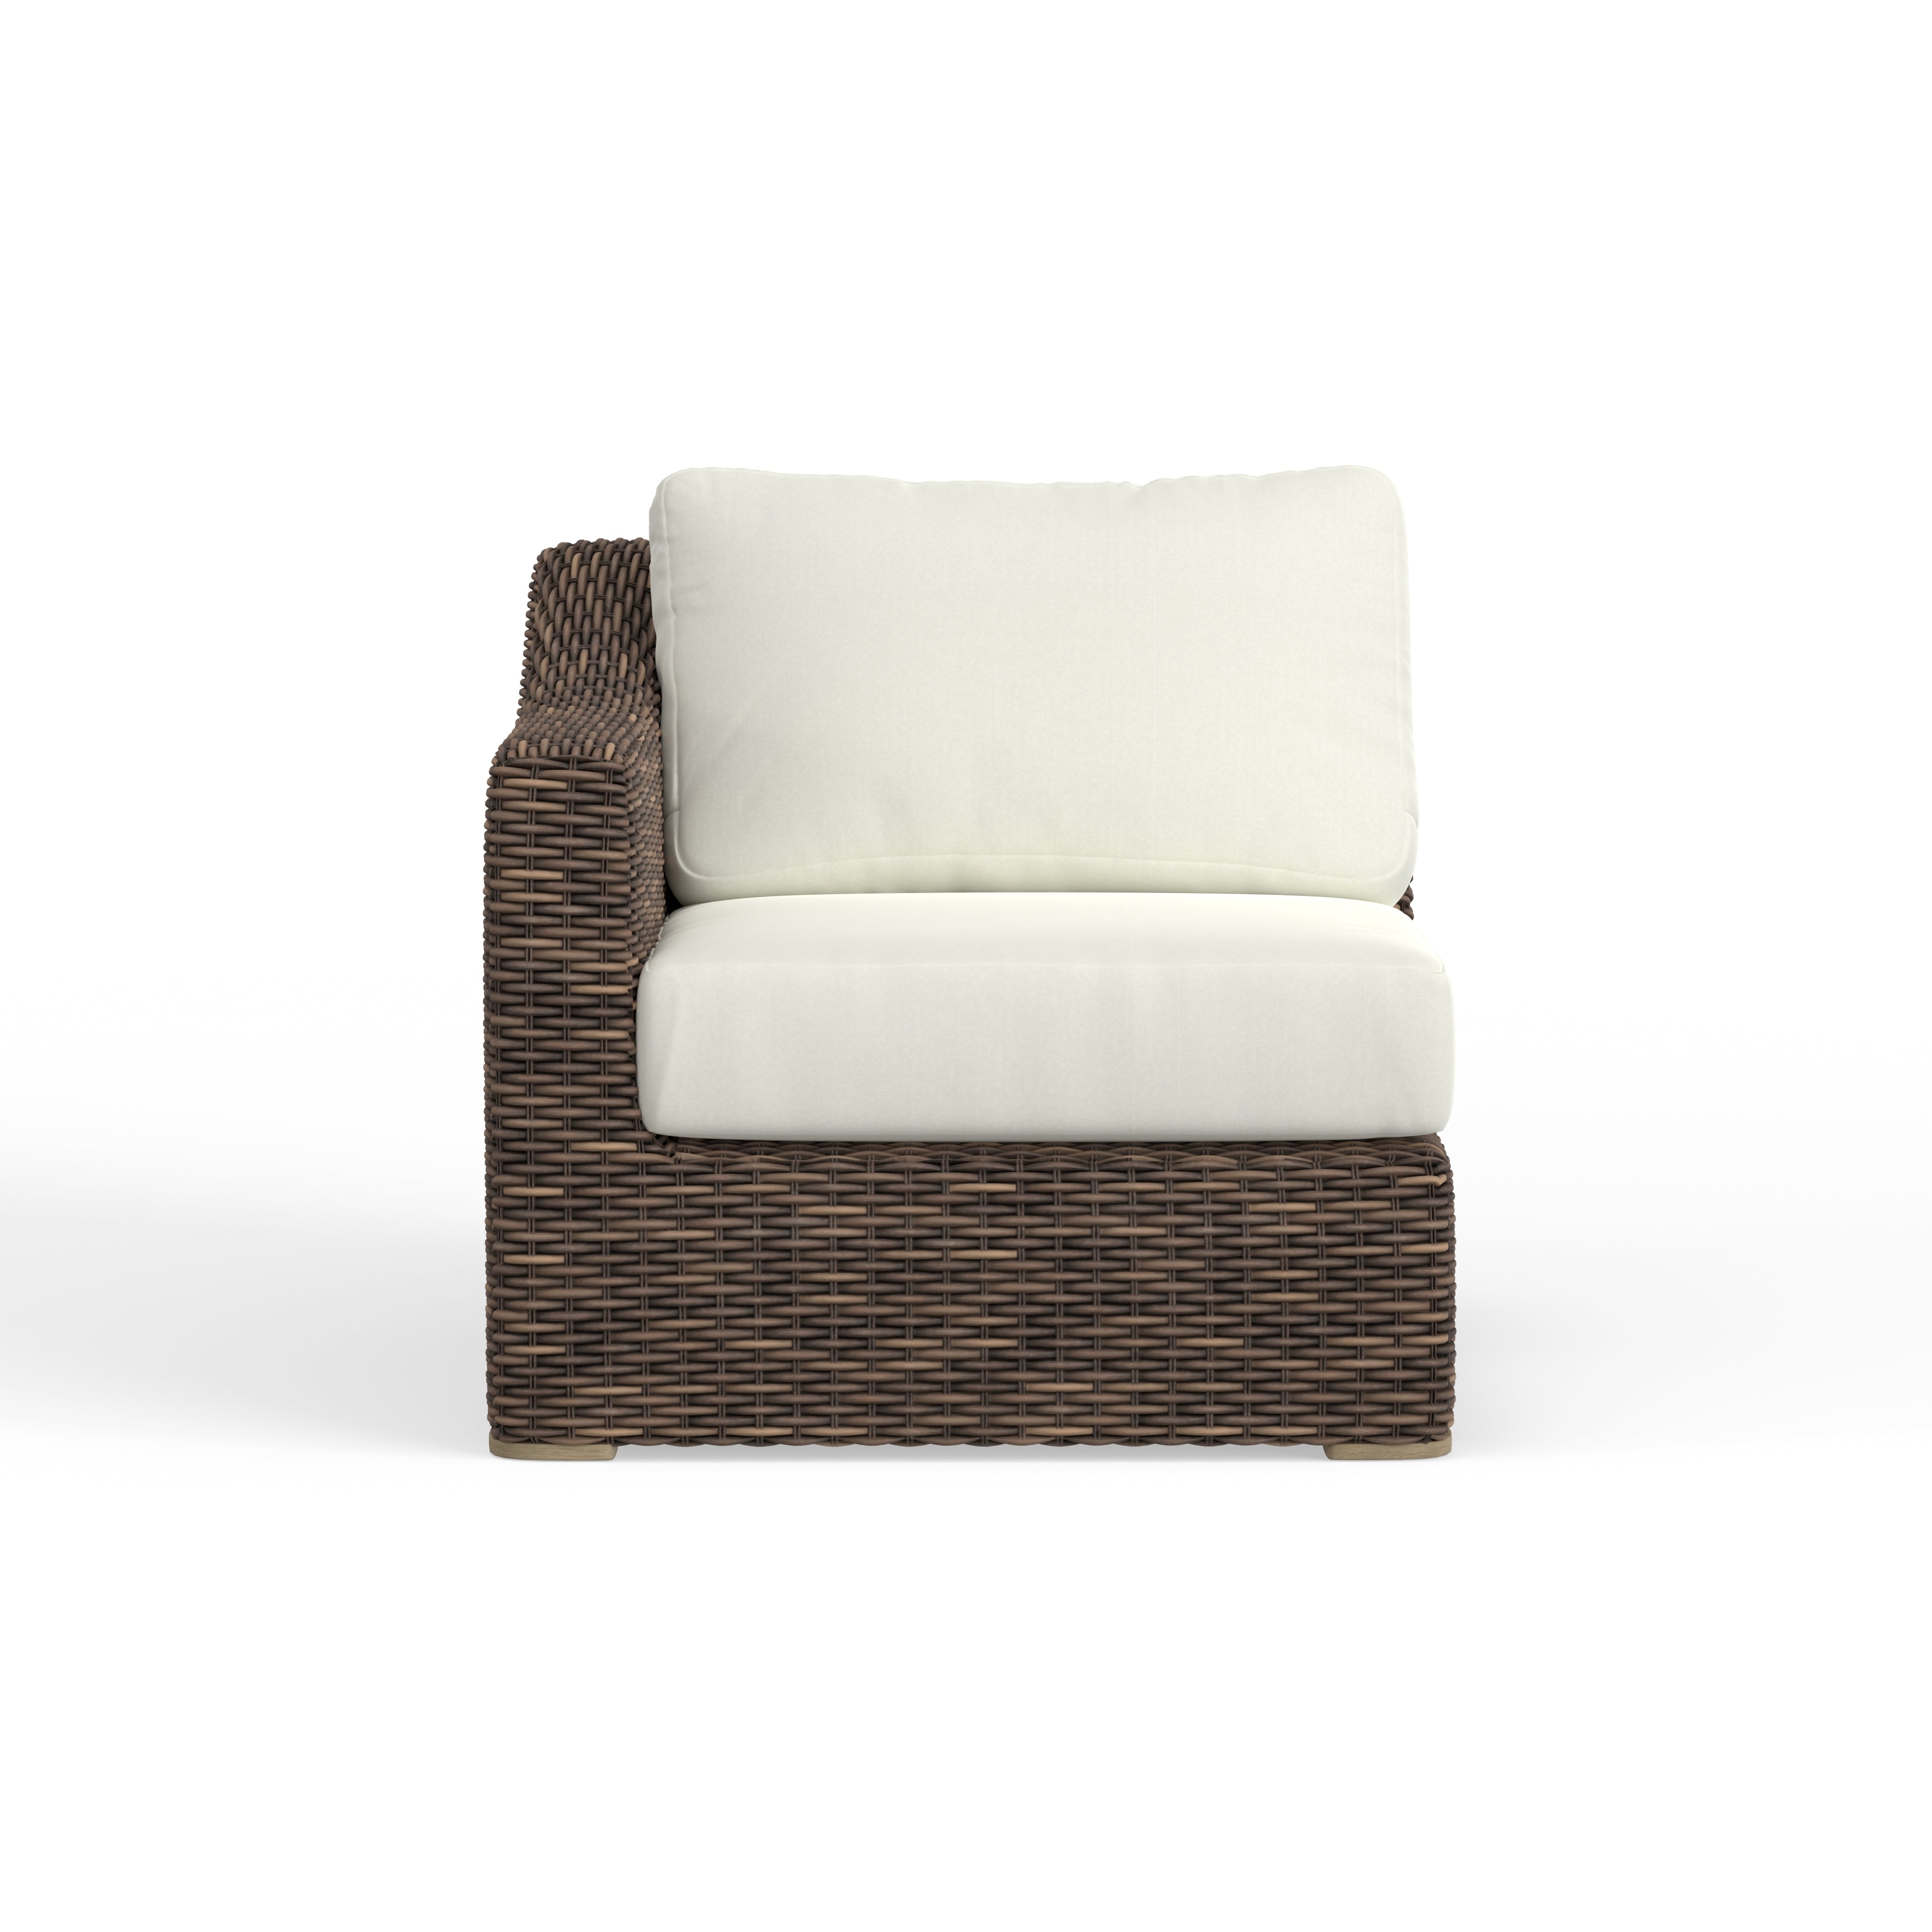 Highest Quality Modular Wicker Sectional